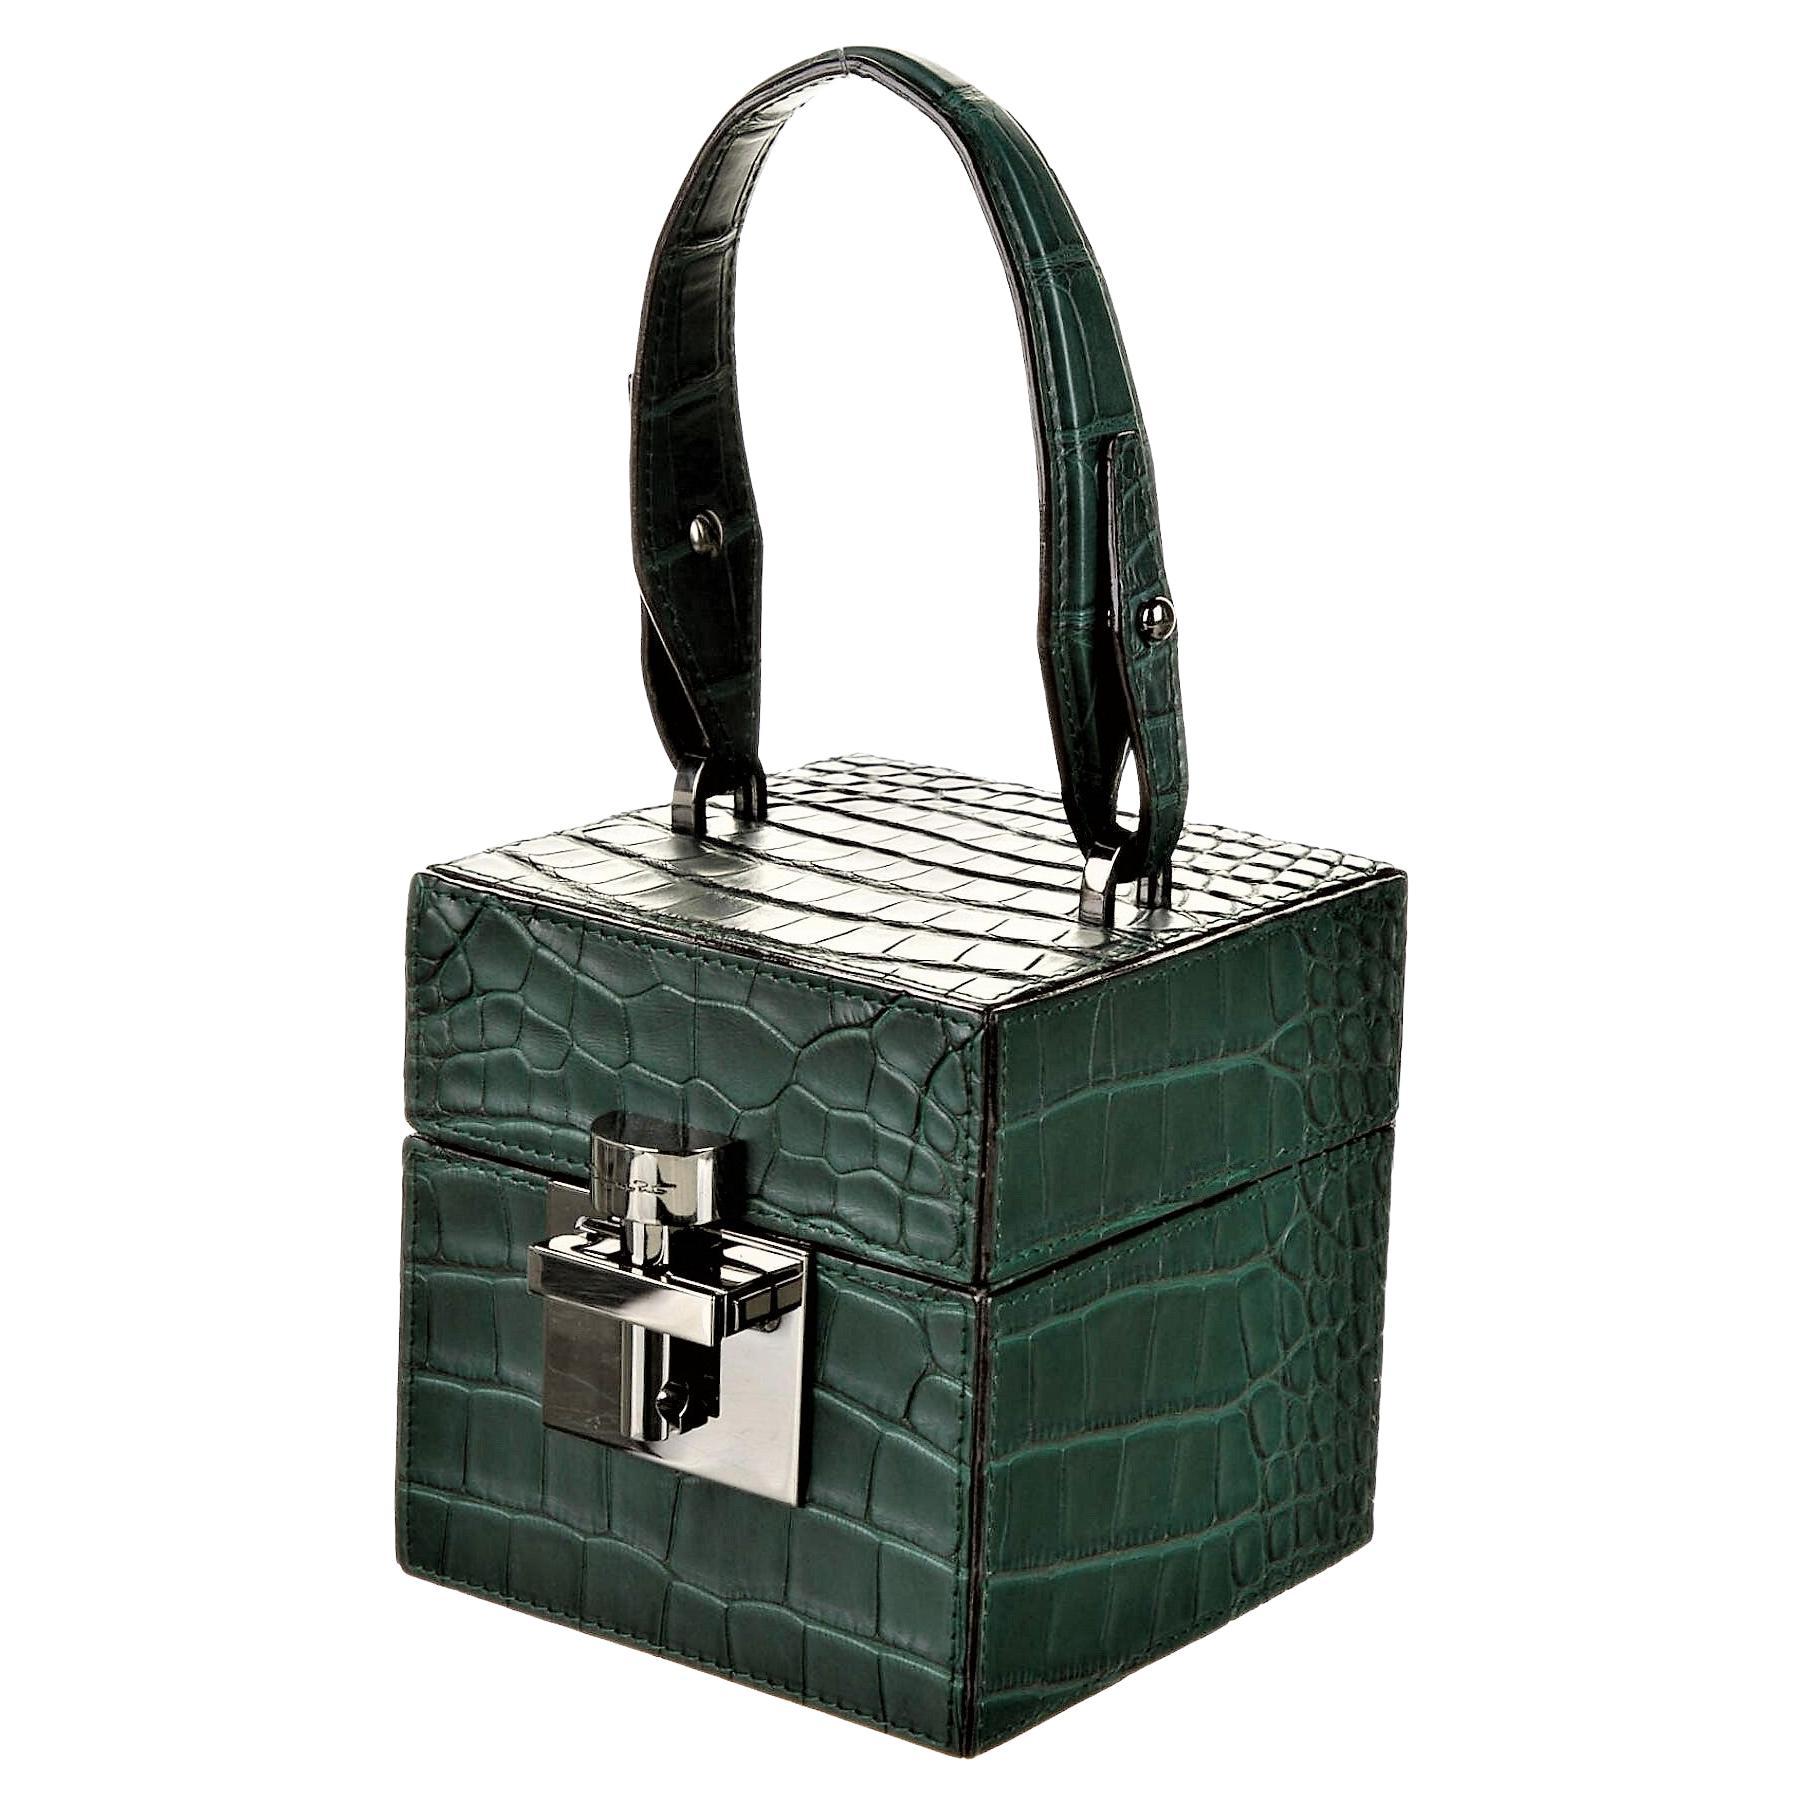 Oscar De La Renta
Brand New with Box & Tags
$9690
* Absolutely Stunning!
Emerald Green Genuine Alligator
Silver Hardware
Flat Handle & Chain-Link Shoulder Strap
Suede Lining with Card Slot
Push-Lock Closure at Front

THE ALIBI CUBE IS CRAFTED FROM